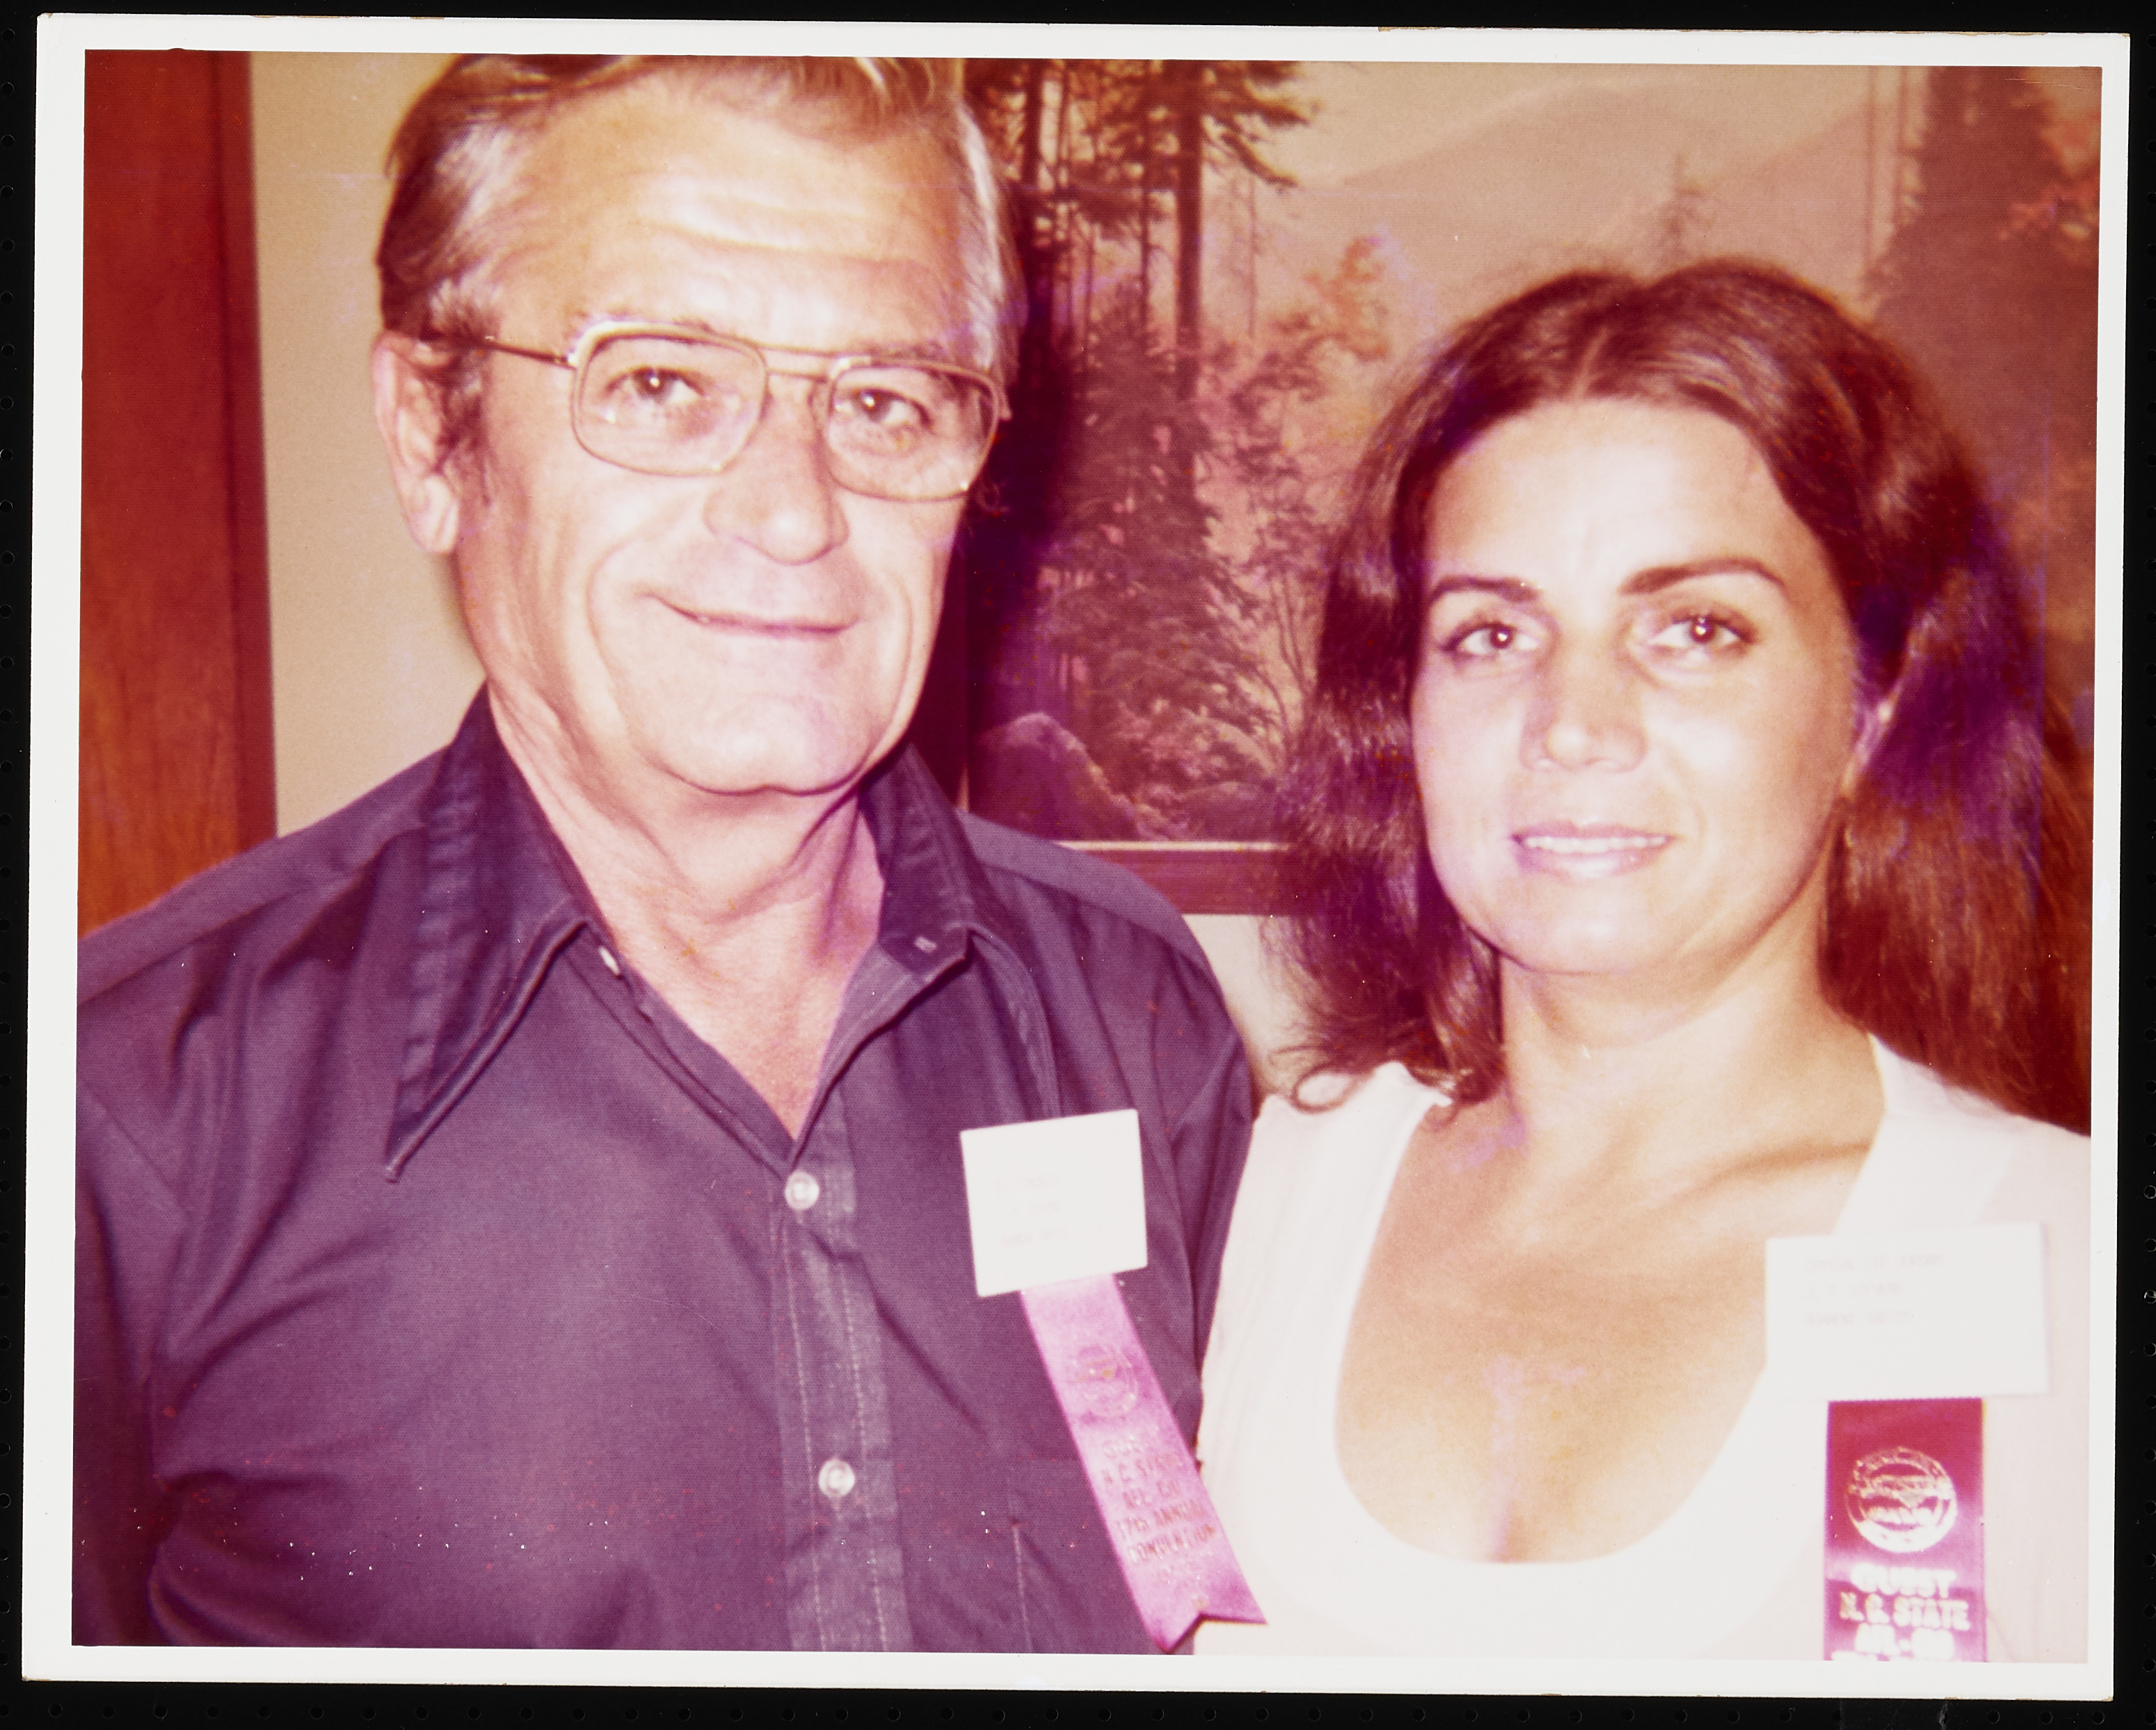 Eli Zivkovich and Crystal Lee Sutton at the 1974 AFL-CIO convention